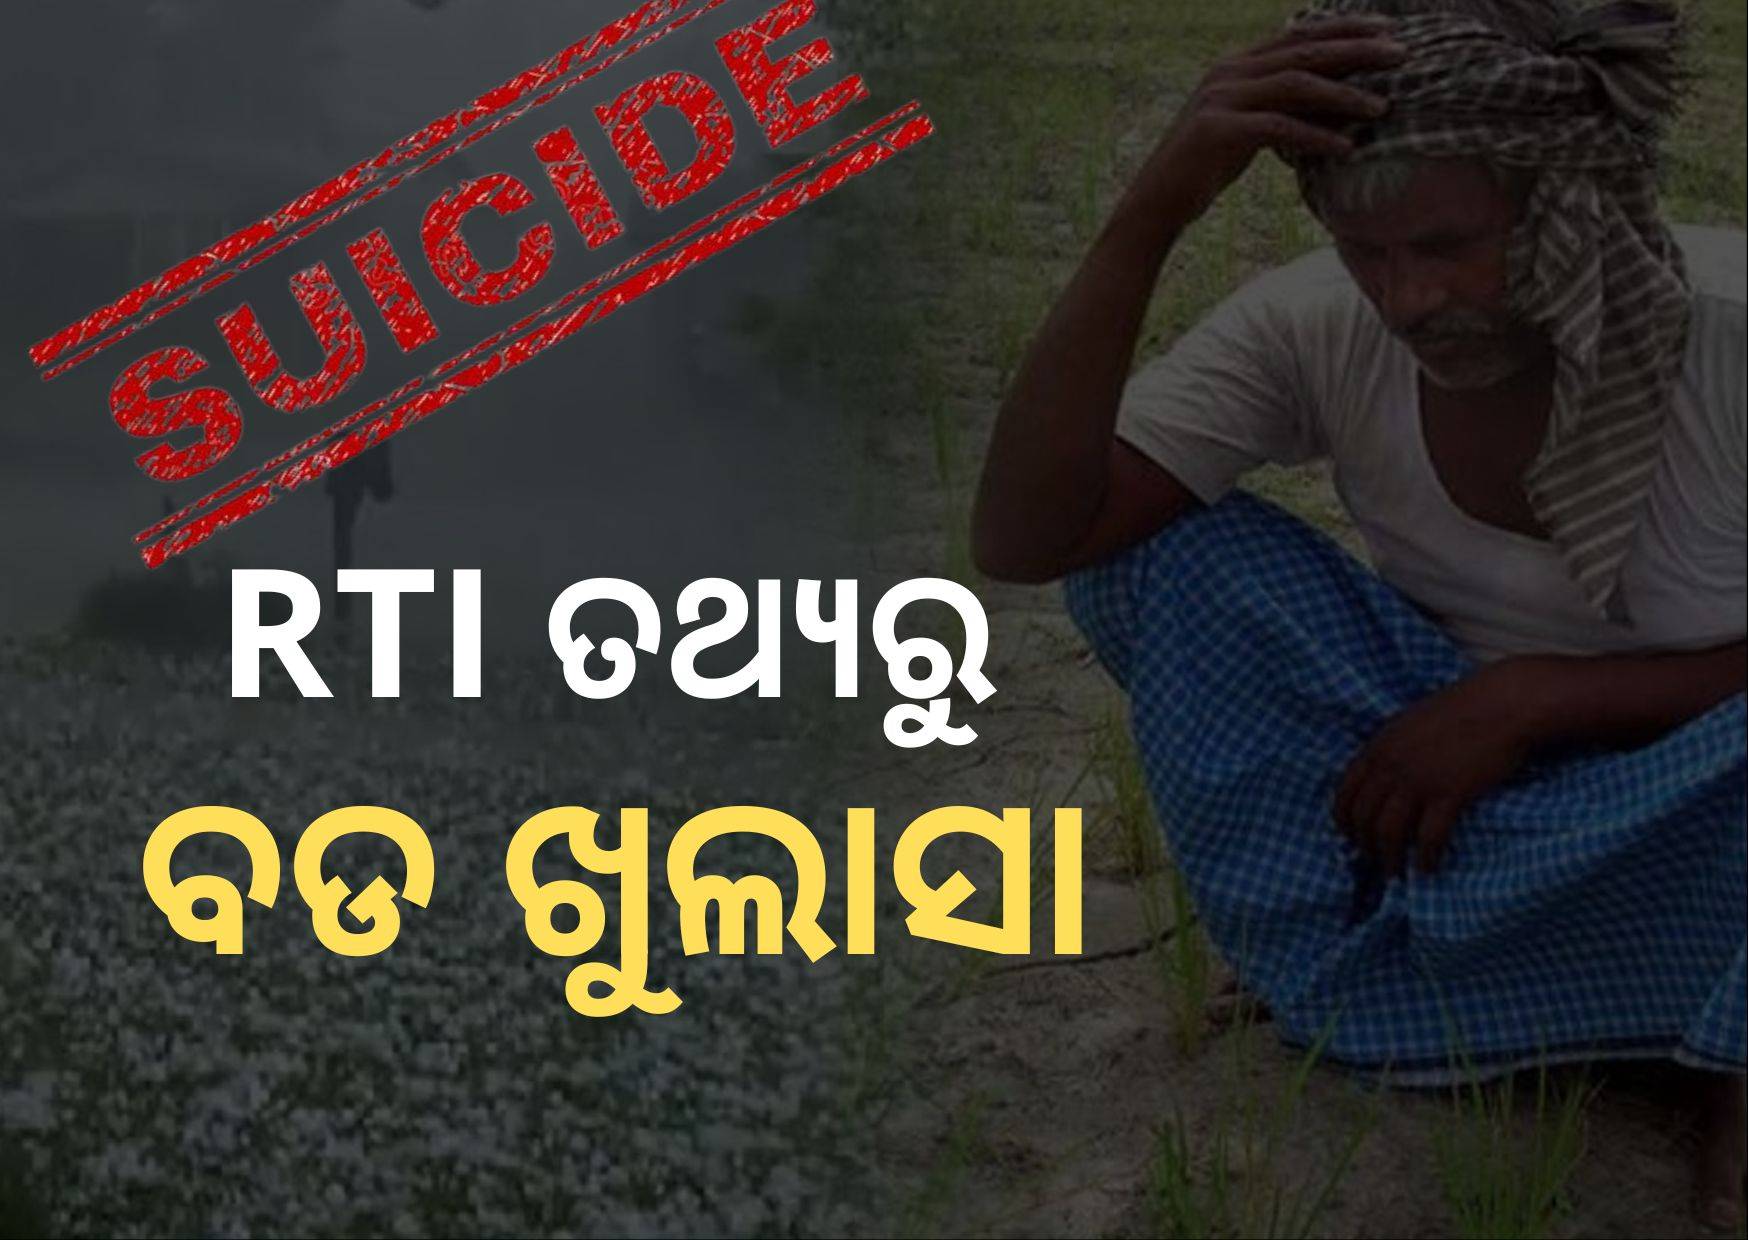 RTI Reveals 122 Deaths by Suicide in WB District